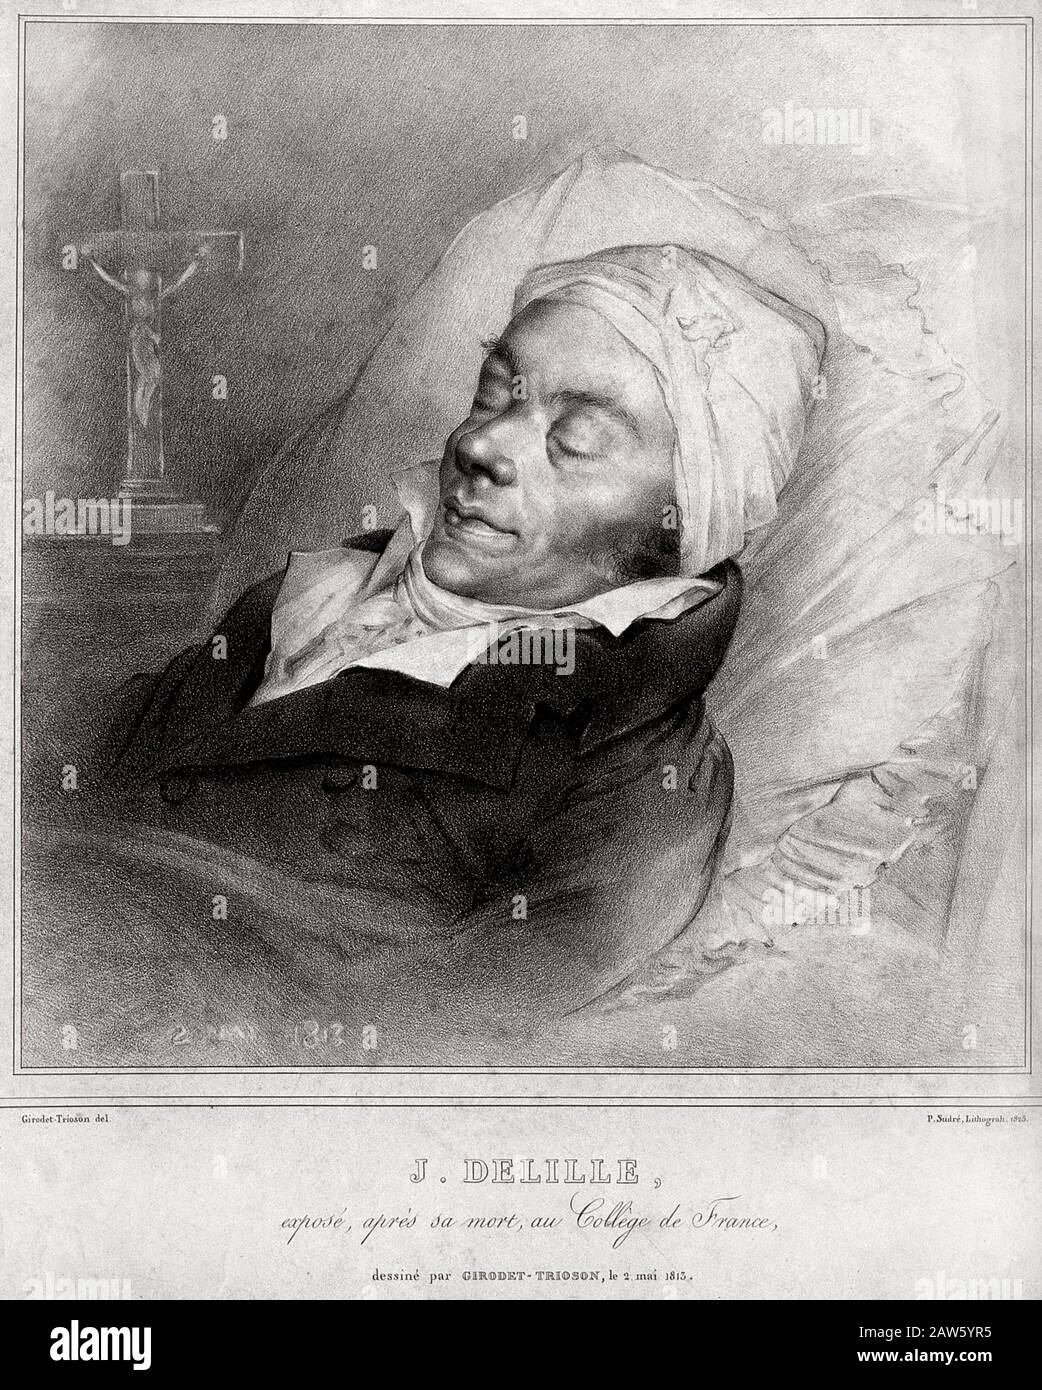 1825 ca, PARIS , FRANCE : The french writer , poet and traslator JACQUES DELILLE ( 1738 - 1813 ), Lithograph by Jean Pierre Sudré  after original  dra Stock Photo